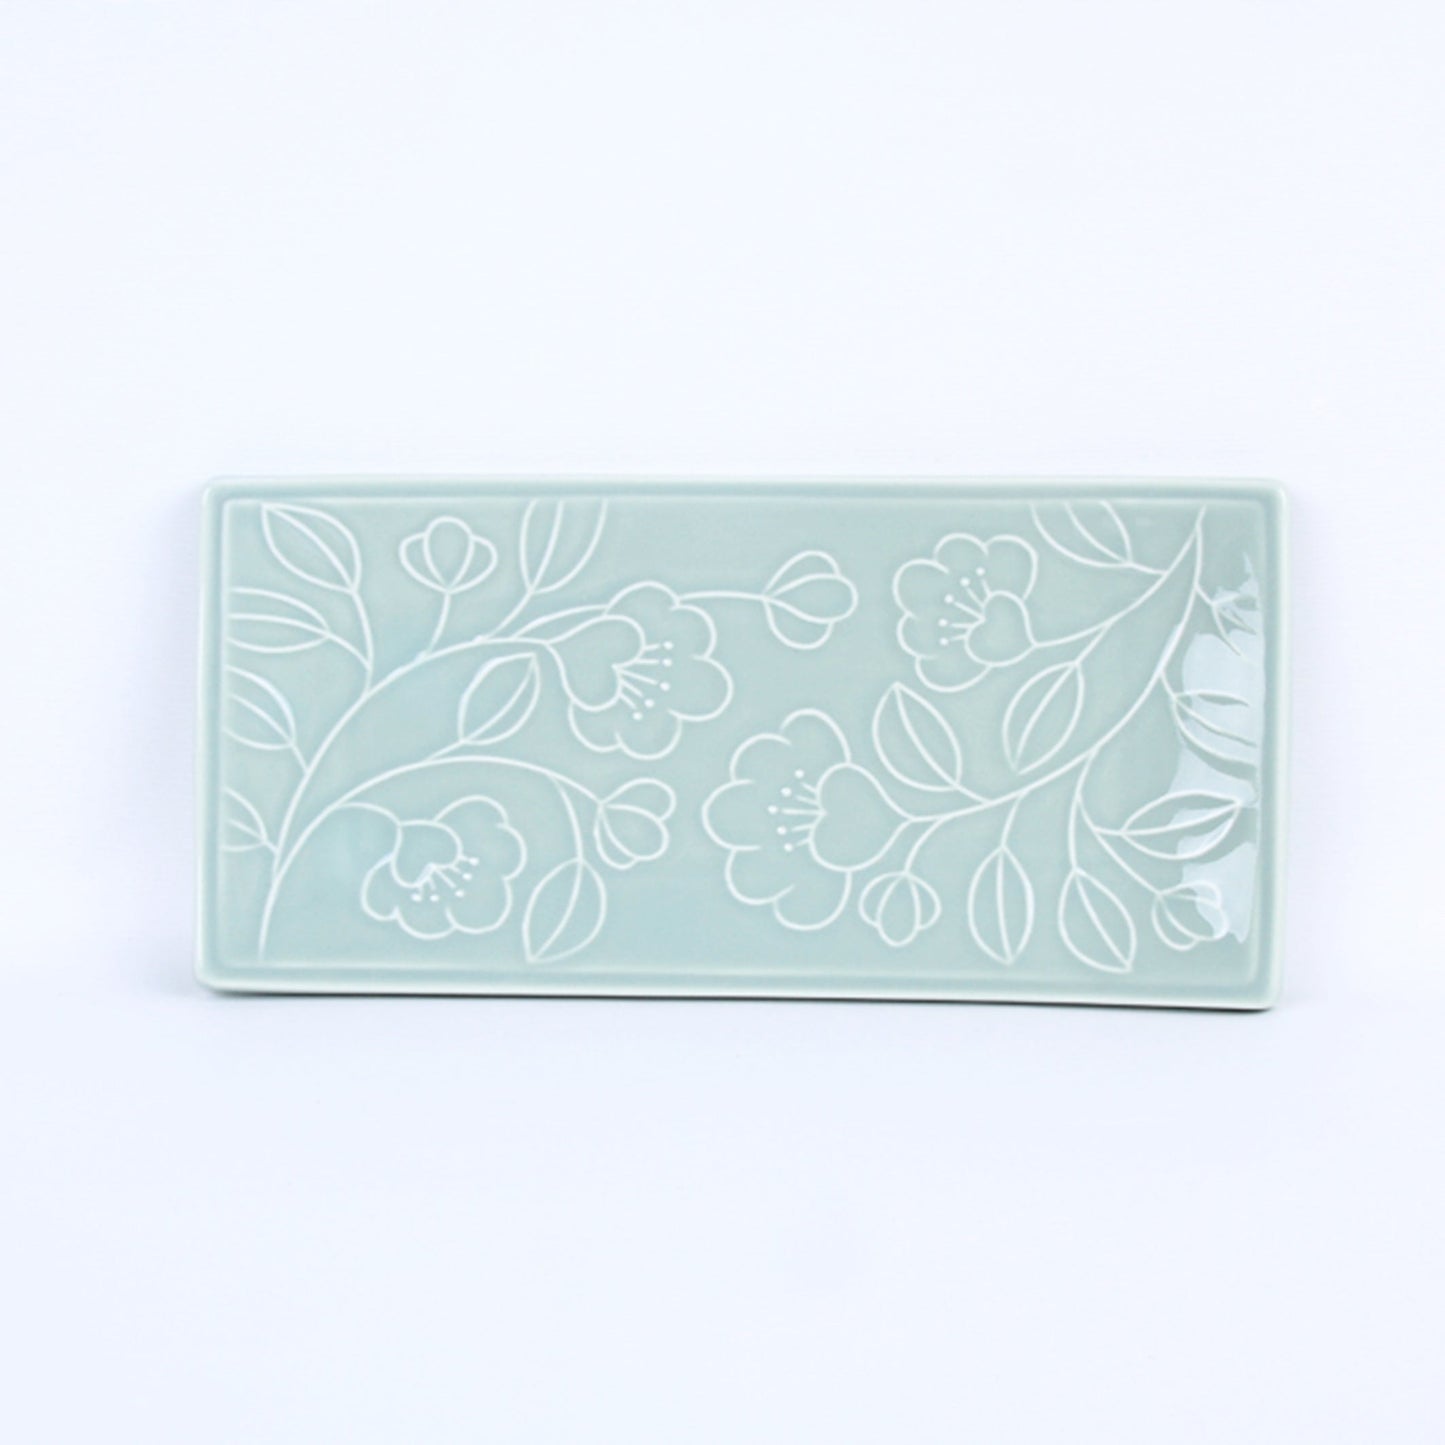 Refreshing Rectangular Plate 300mm (Mint Color)𝟭 𝗣𝗹𝘂𝘀 𝟭